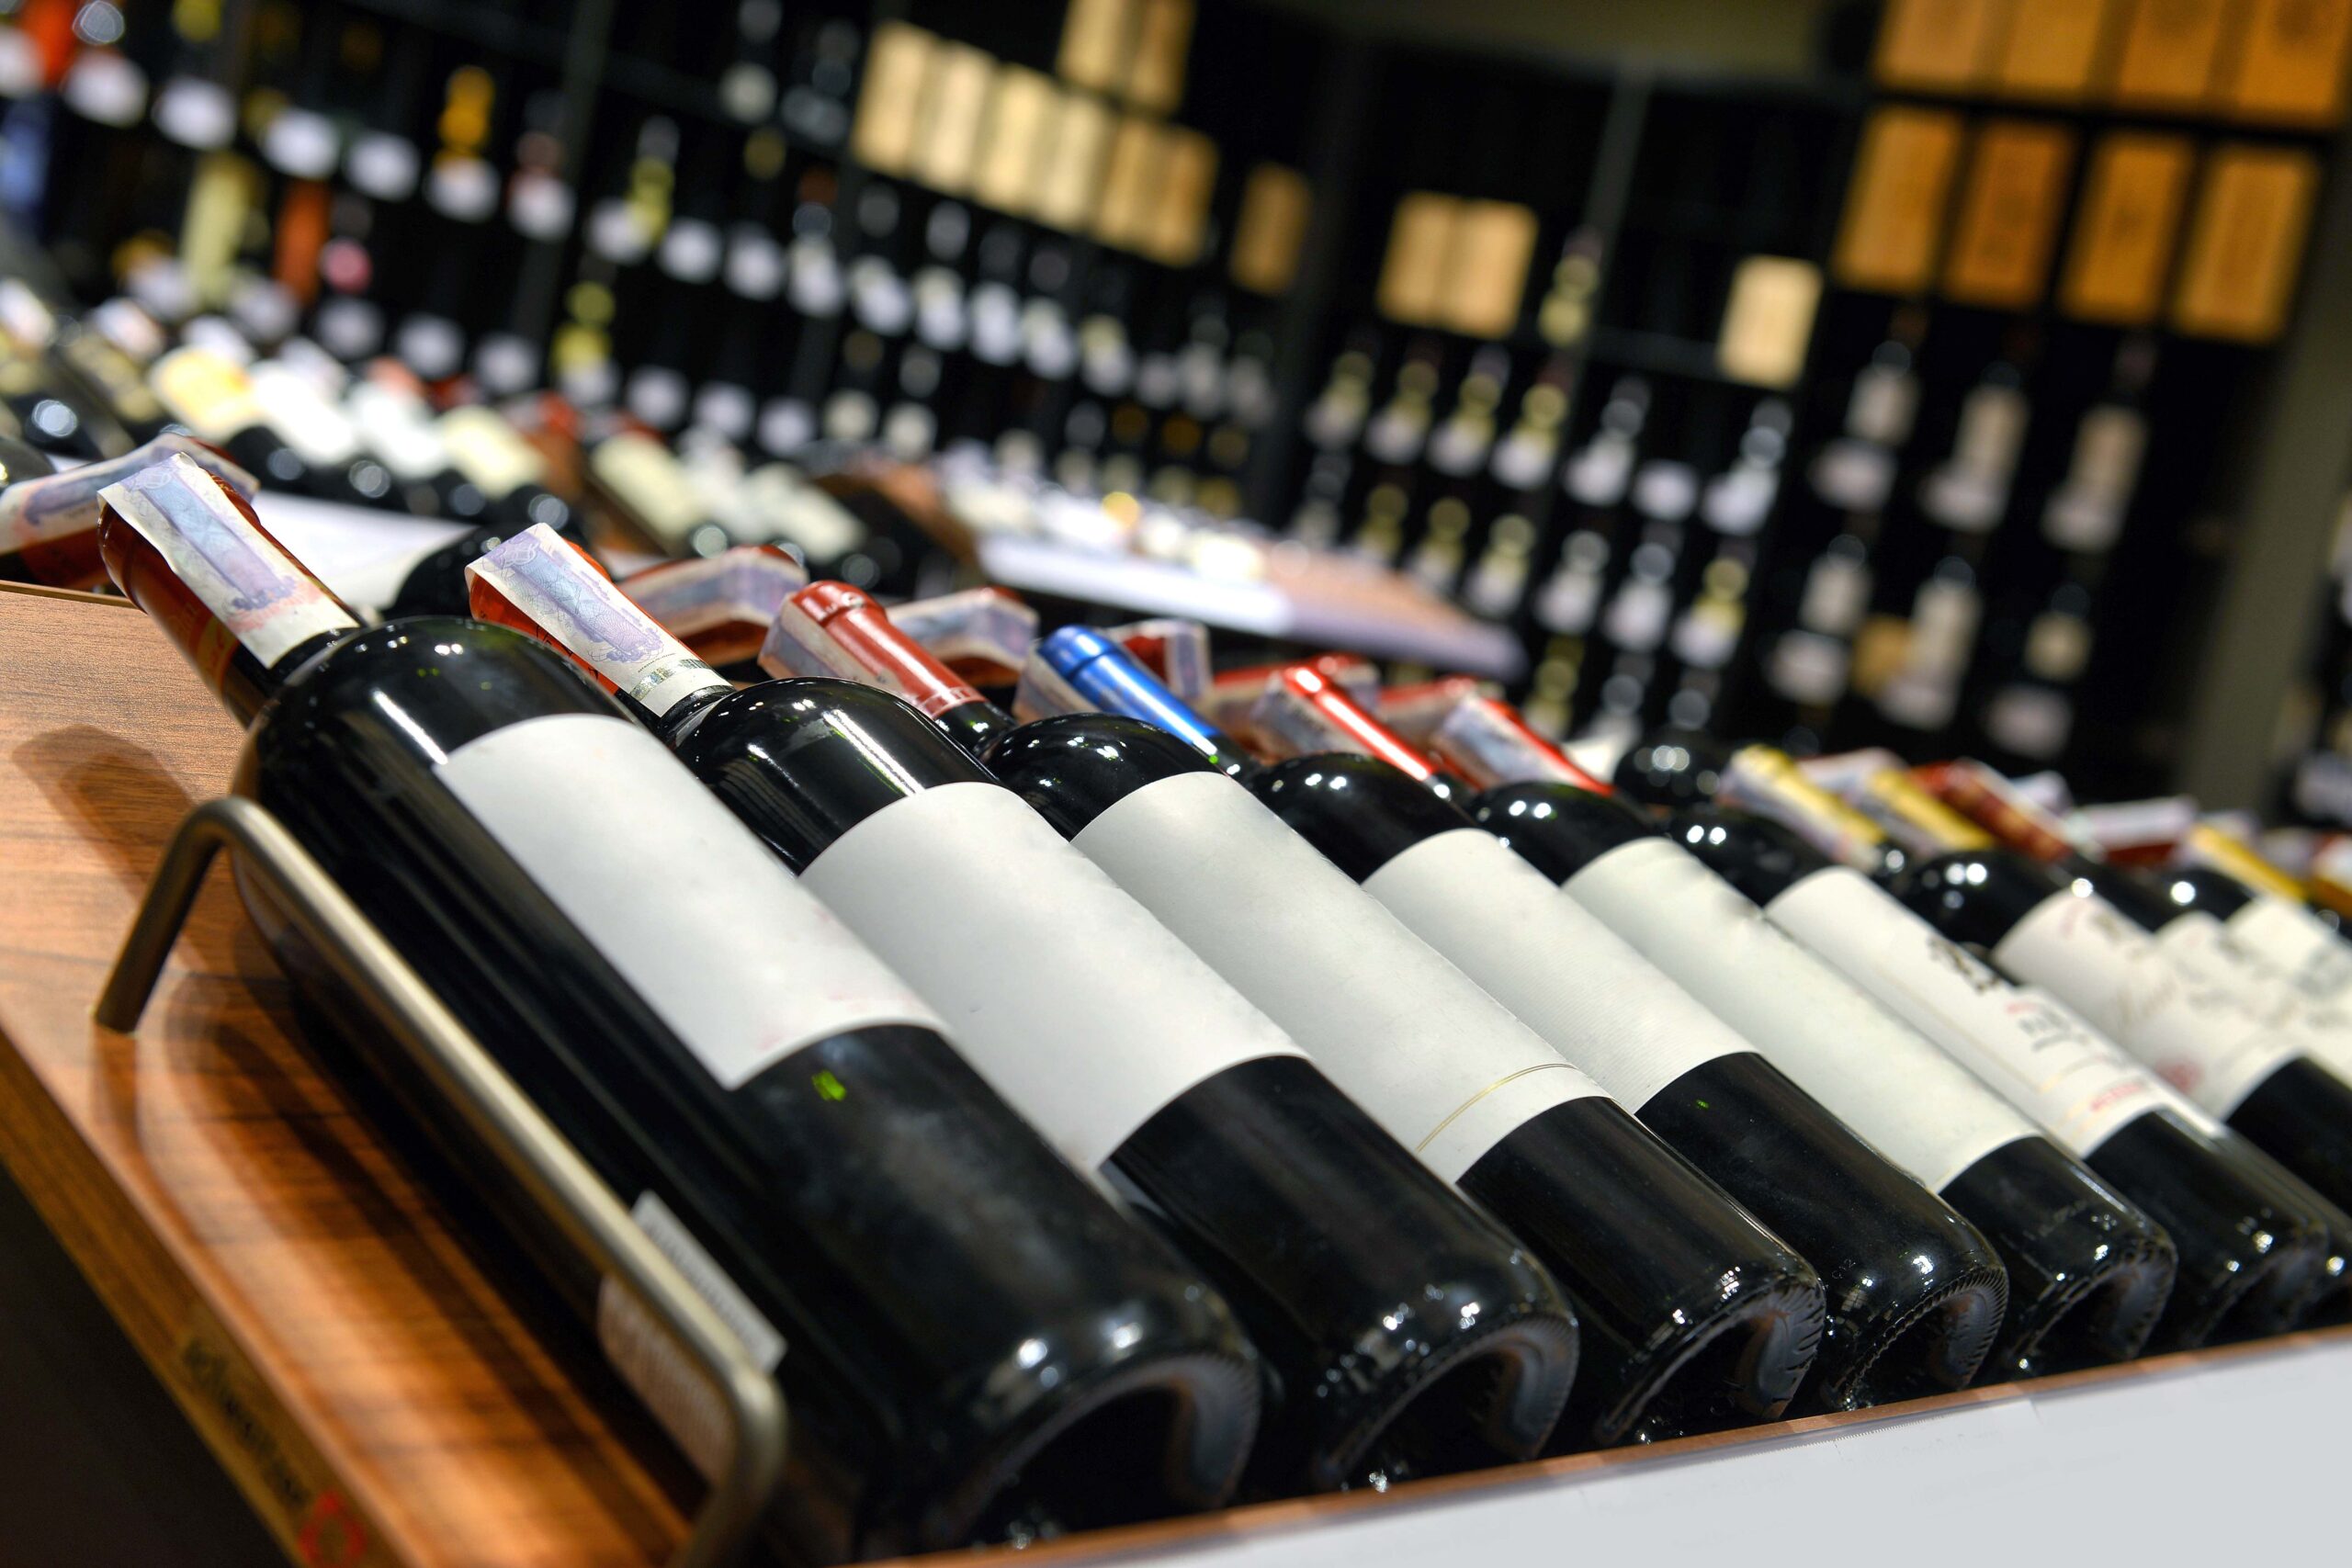 14 Best Wines at Costco According To a Sommelier